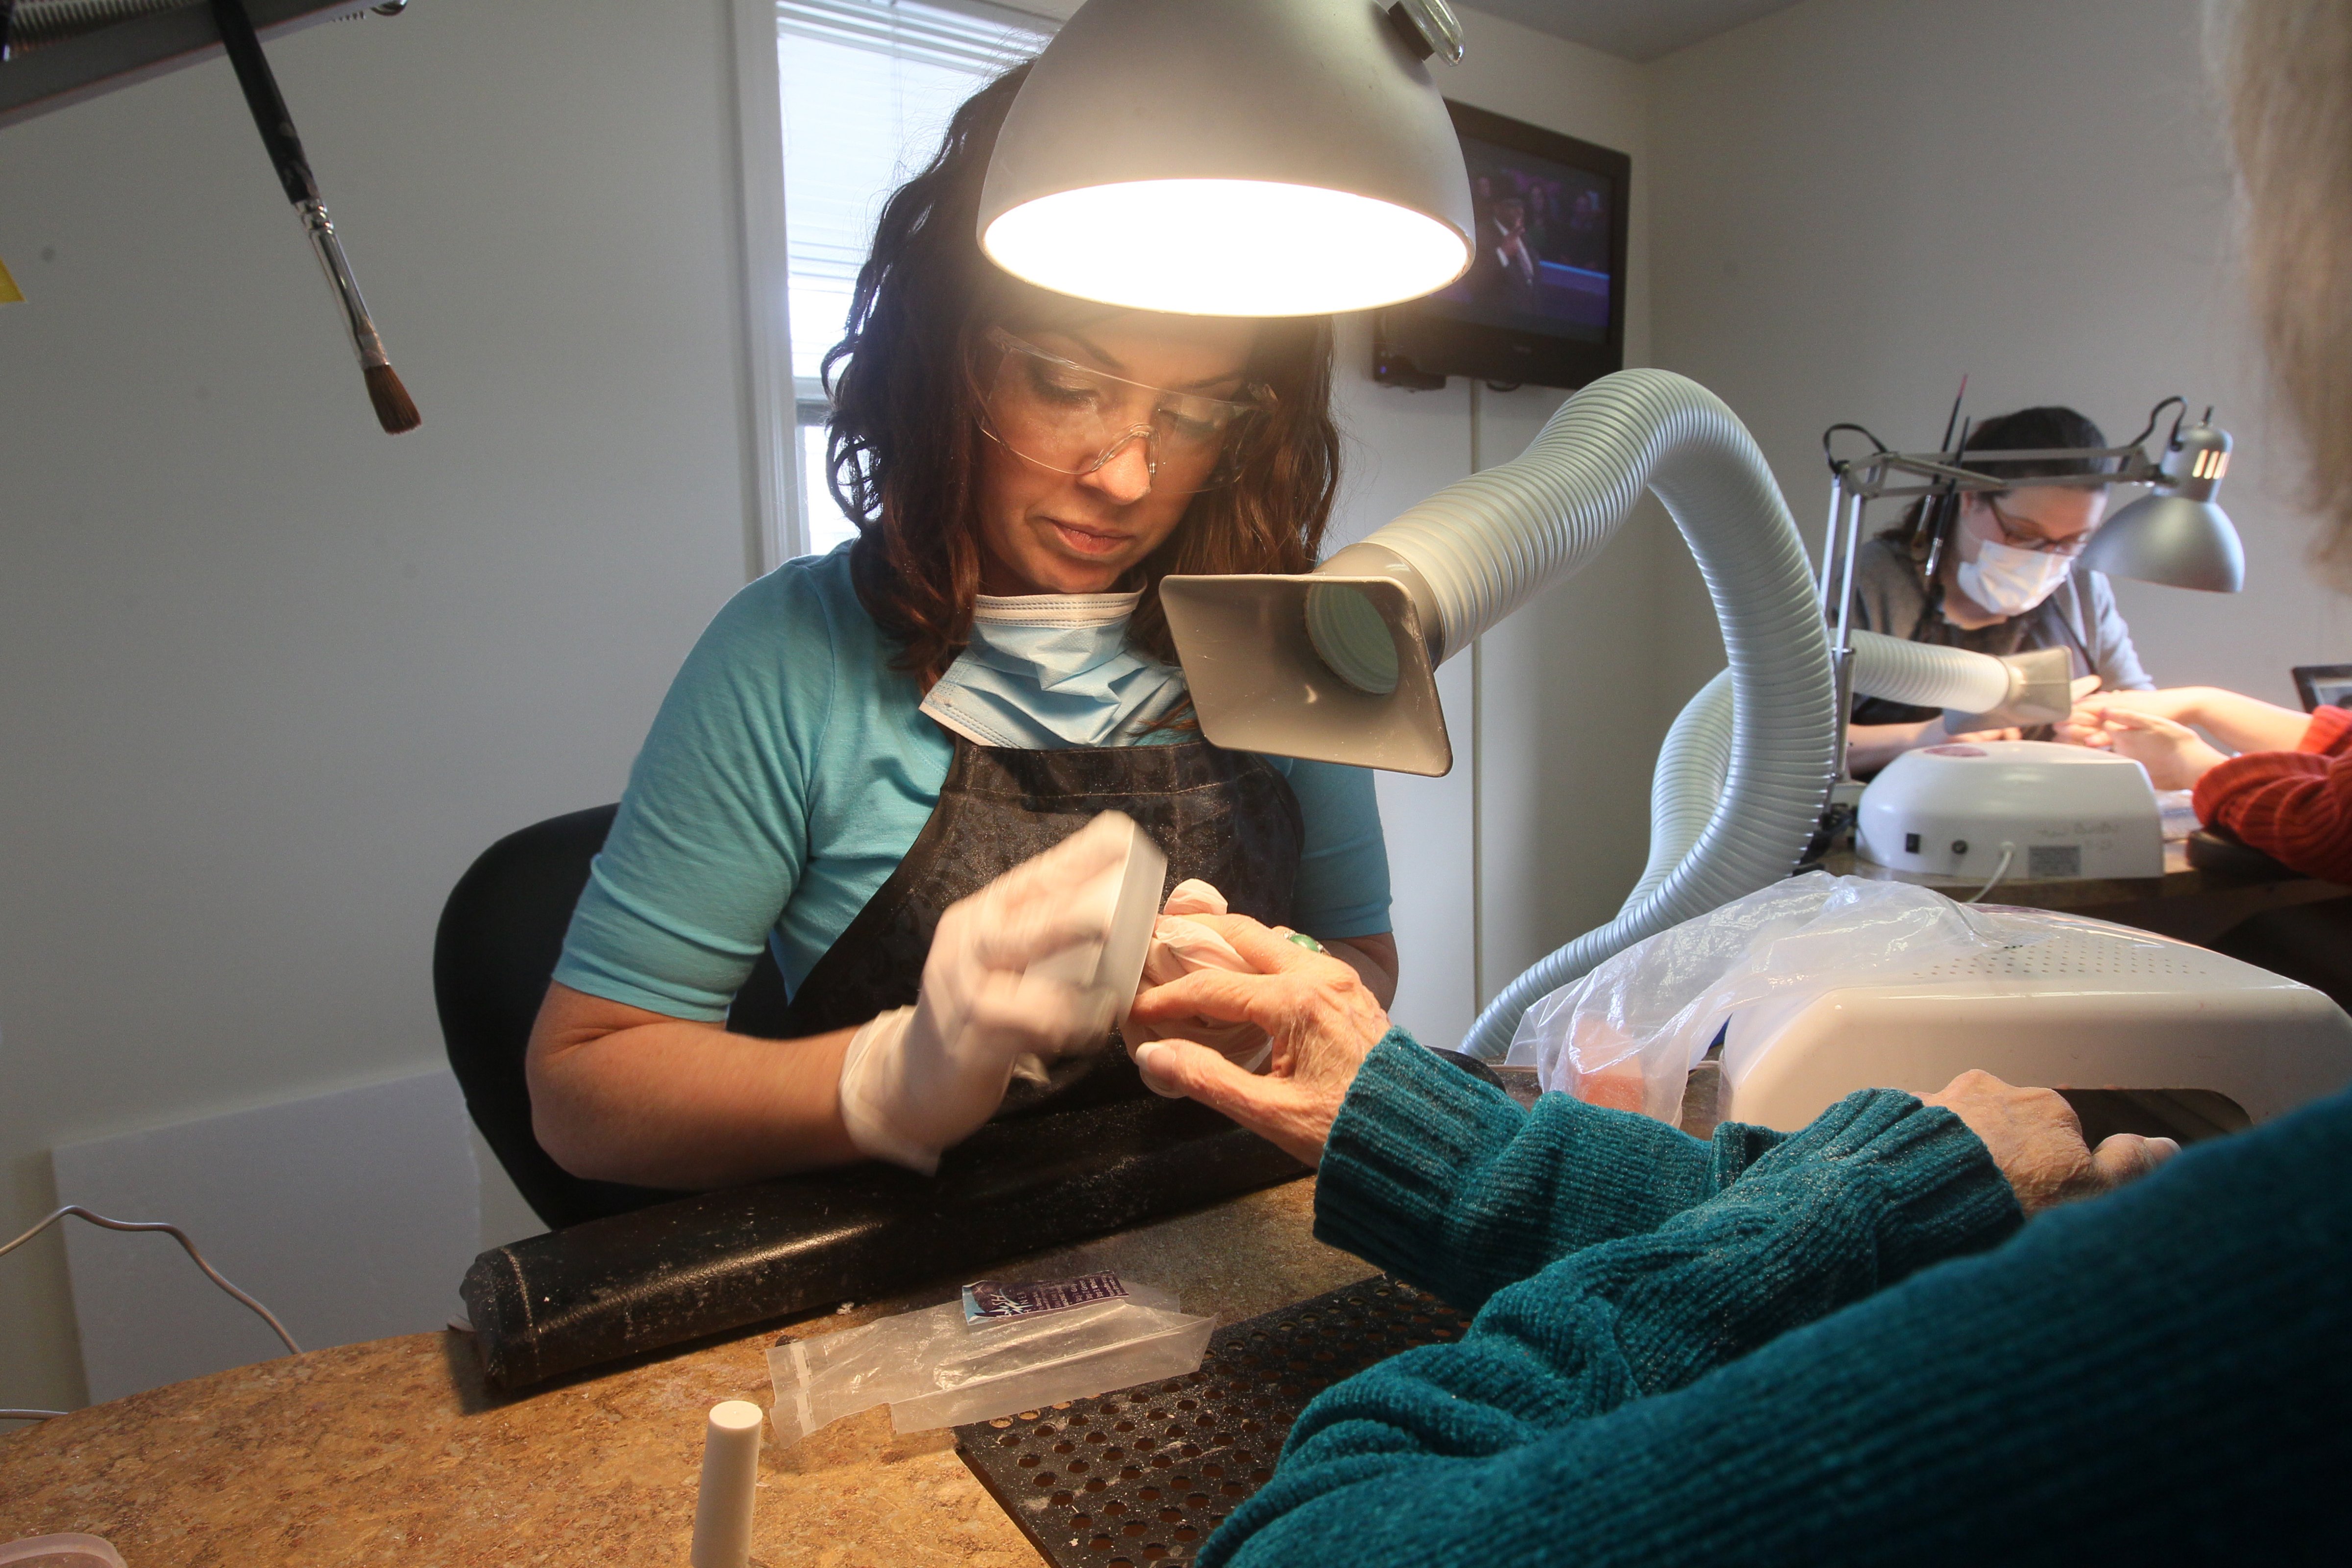 Nail technician Kellie Deagazio uses a nail ventilation system as she applies acrylics to customer Adrienne Wilson of Brookline at Forever French Salon in Norwood. (Joanne Rathe—Boston Globe/Getty Images)